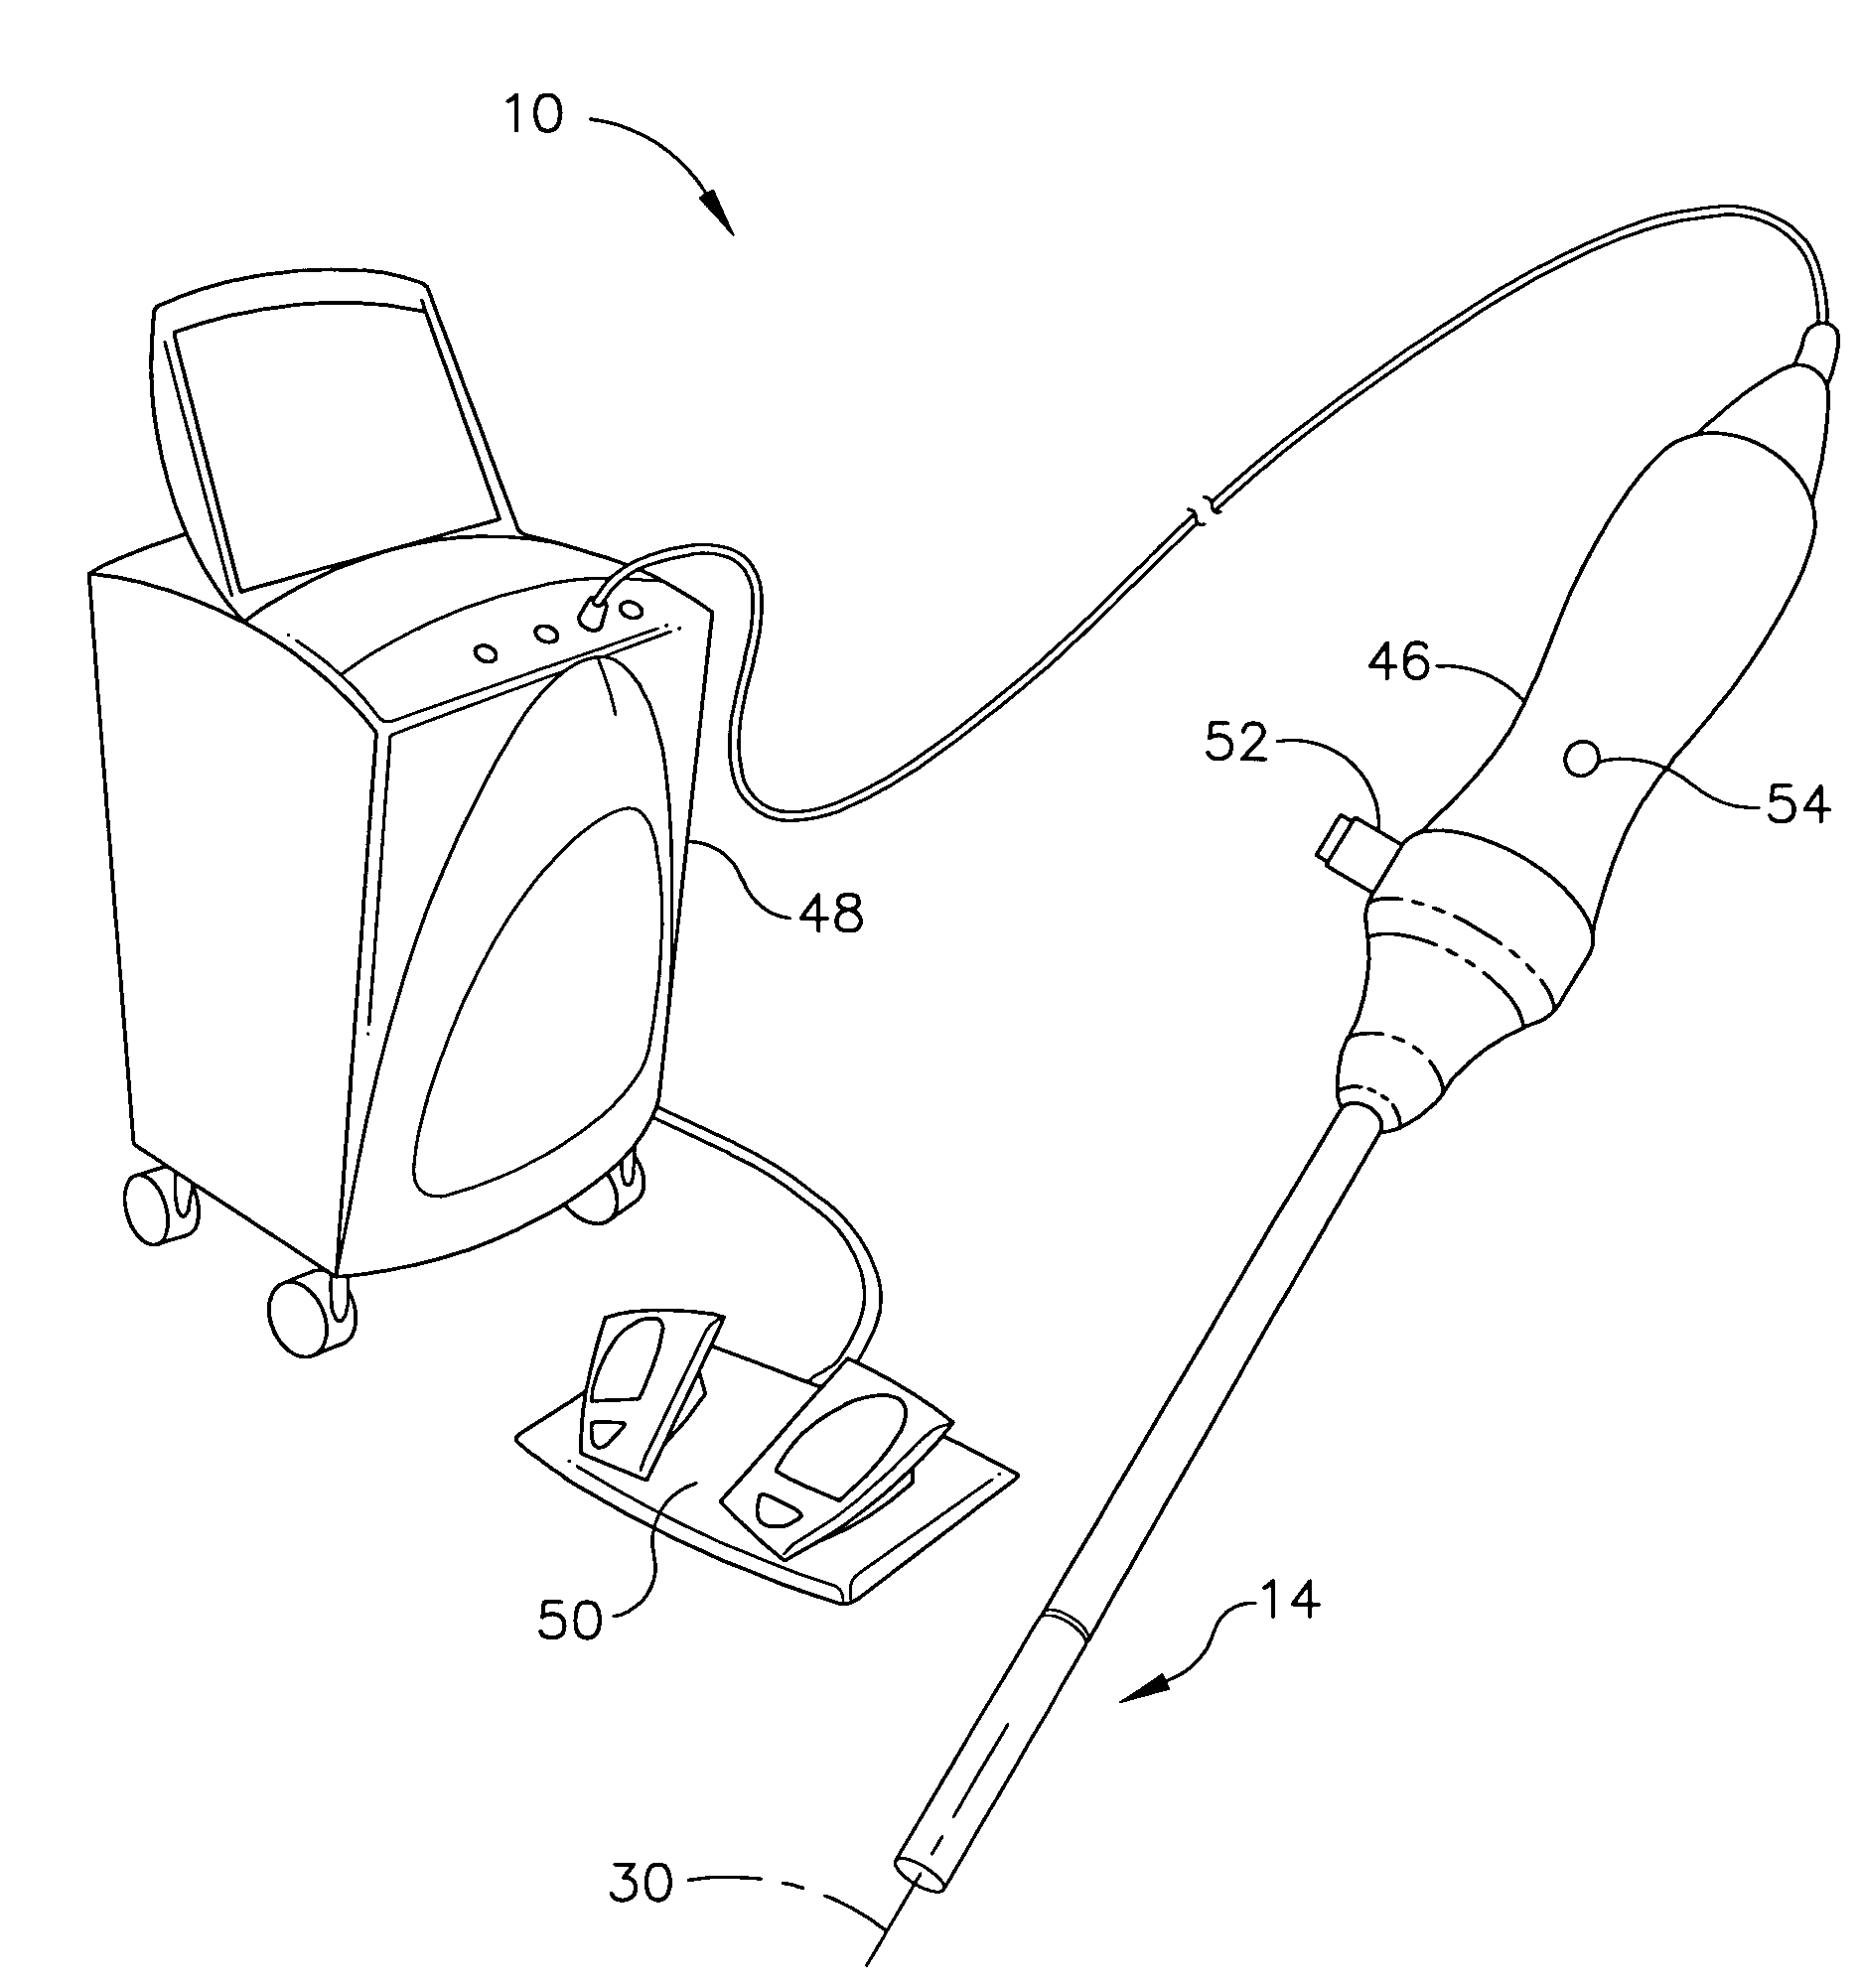 Intra-cavitary ultrasound medical system and method